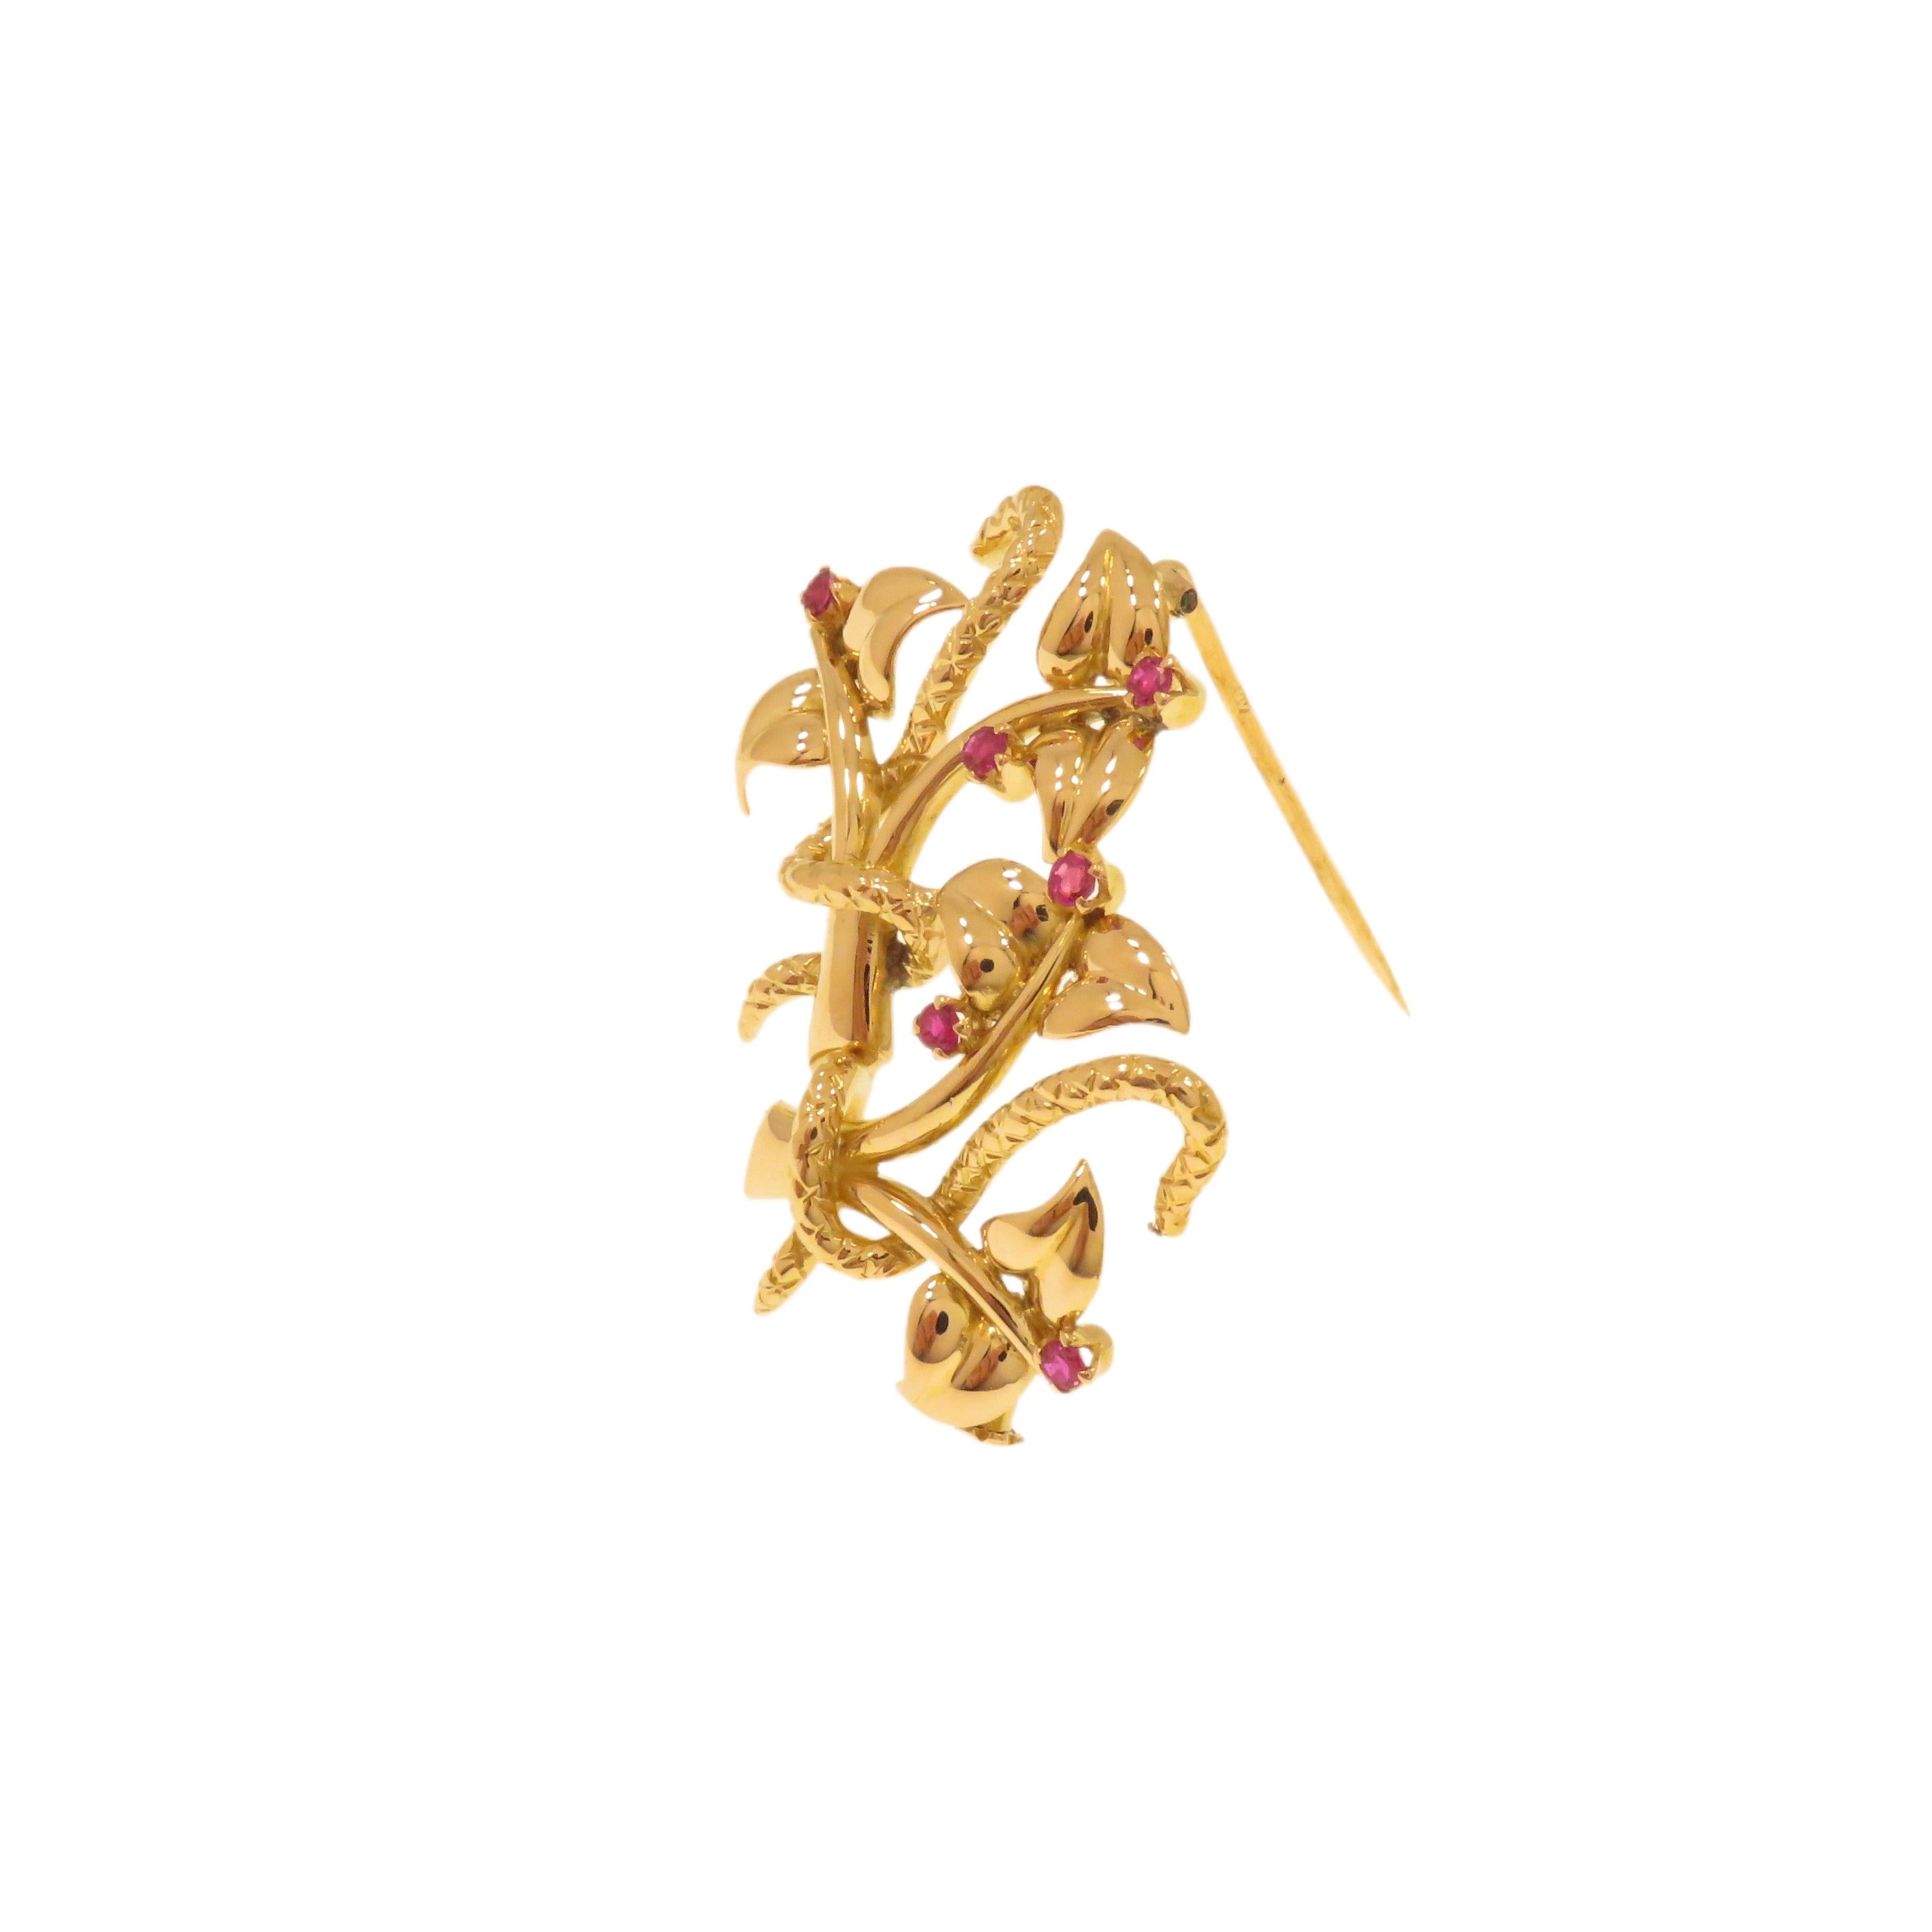 Gorgeous vintage brooch composed of floral elements intertwined with snake bodies. Handcrafted in the 1960s in 18-carat rose gold and decorated with 6 brilliant-cut rubies of about 0.20 carat. Questa raffinata spilla si fissa sul retro con un perno